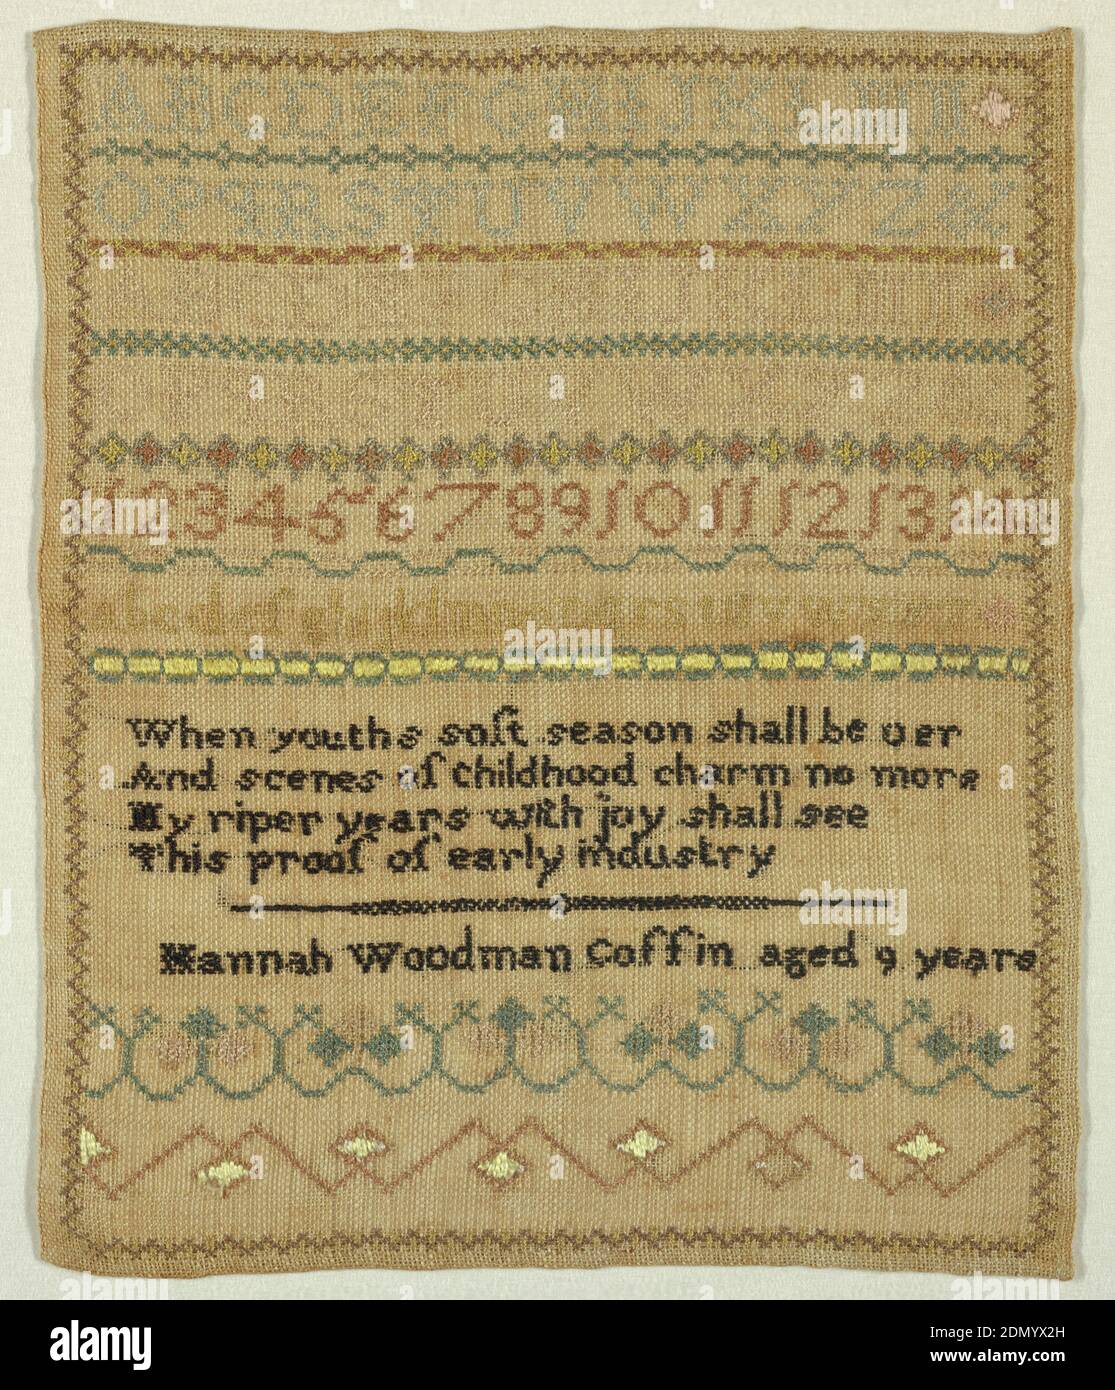 Sampler, Hannah Woodman Coffin, American, Medium: silk embroidery on linen foundation Technique: embroidered in cross stitch on plain weave foundation, Bands of alphabets and numerals separated by narrow geometric cross borders, a verse and inscription, in colored silks on tan linen., The verse reads:, When youths soft season shall be oer, And scenes of childhood charm no more, My riper years with joy shall see, This proof of early industry, USA, early 19th century, embroidery & stitching, Sampler Stock Photo